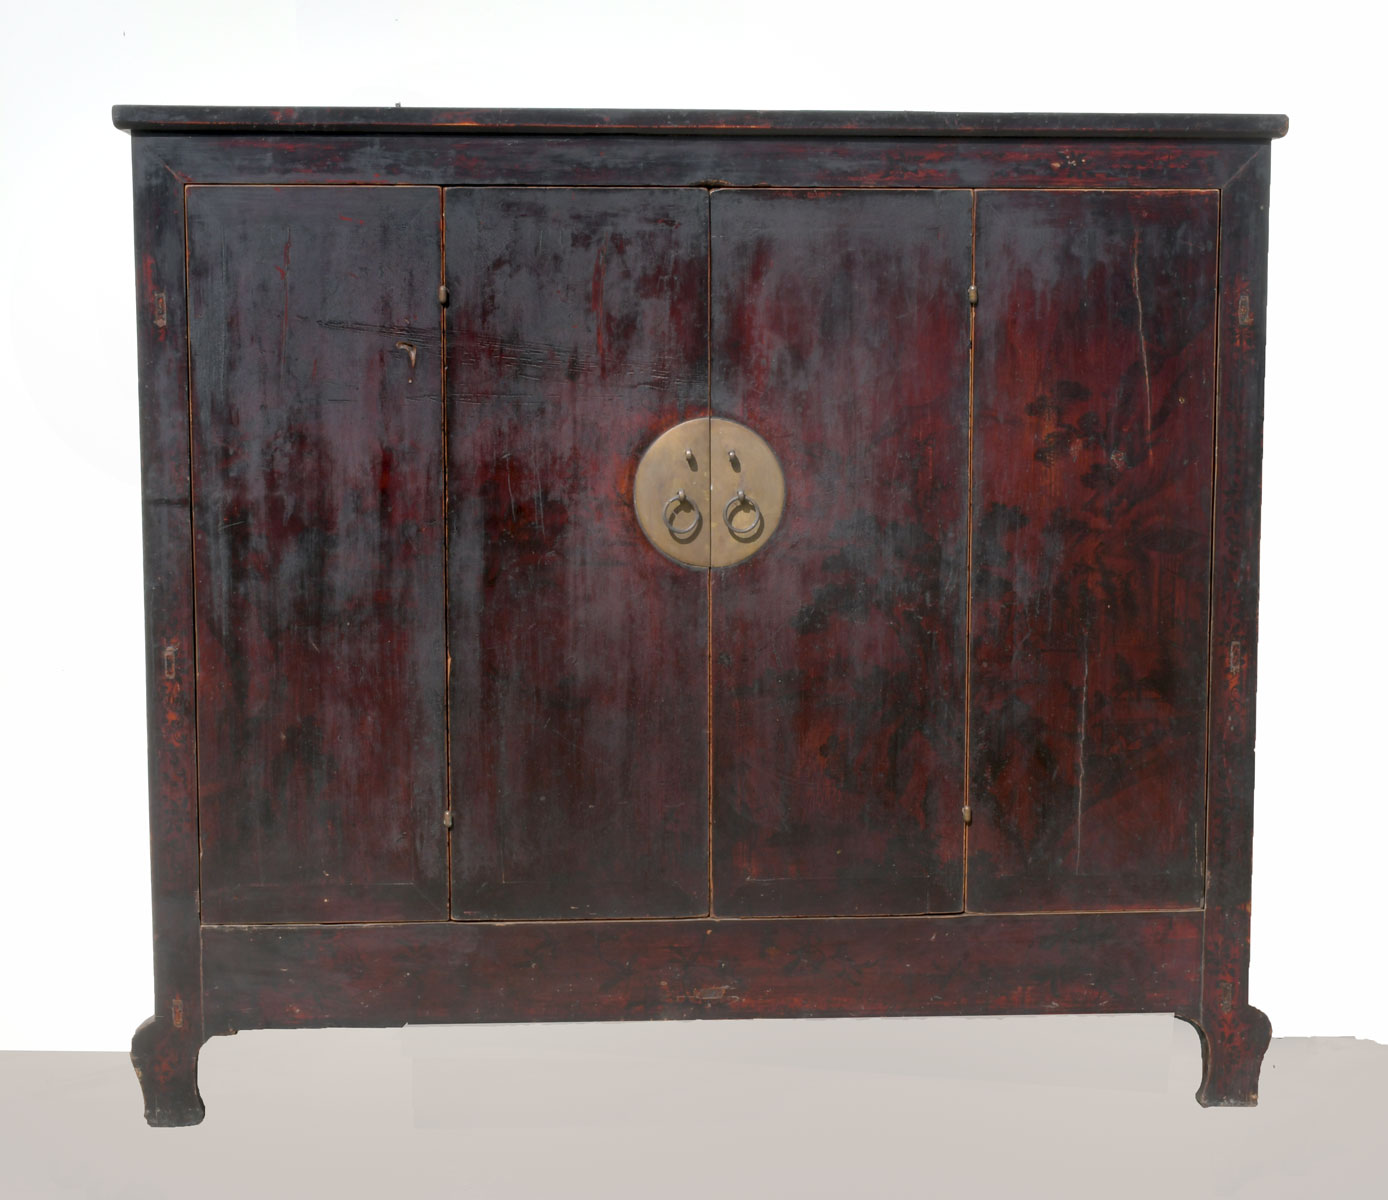 LARGE 19TH CENTURY CHINESE CABINET: